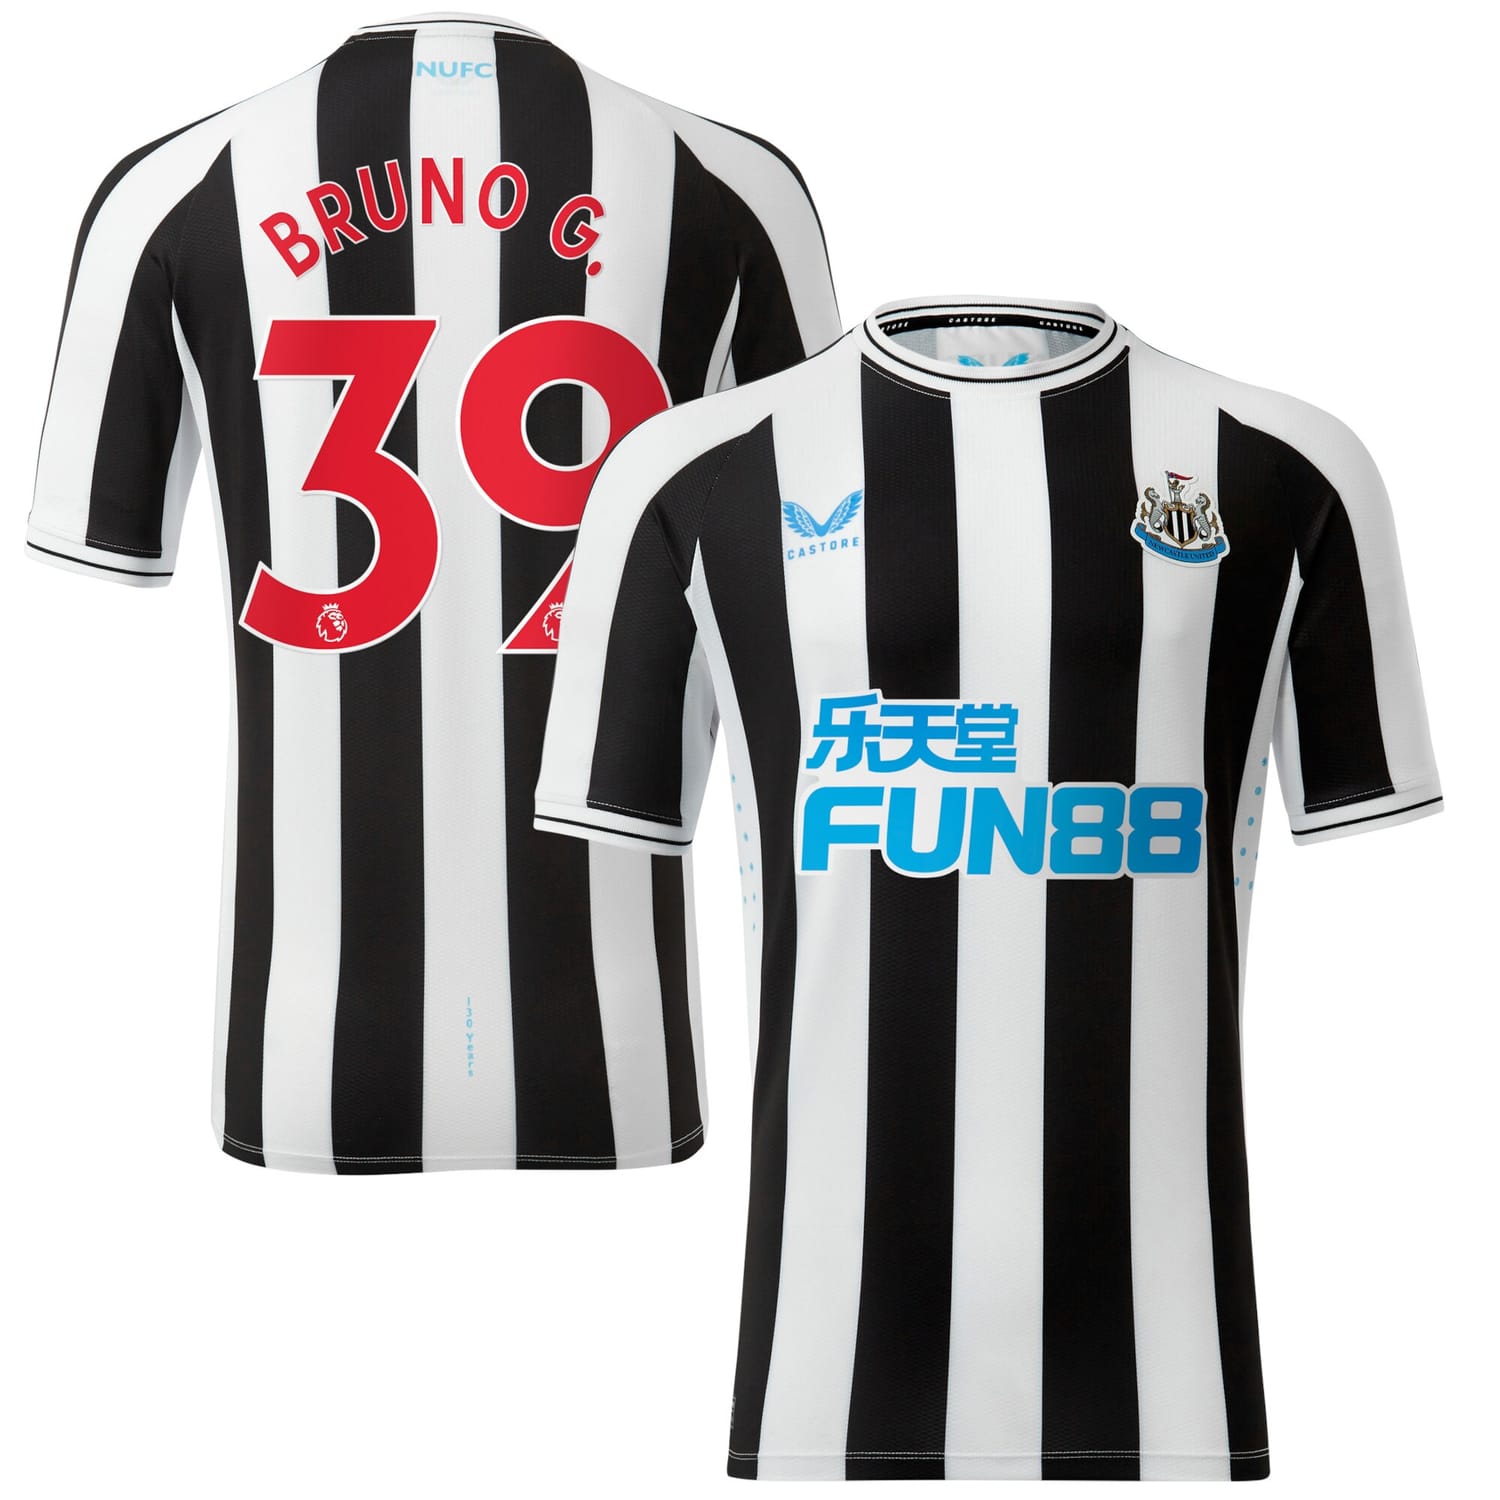 Premier League Newcastle United Home Pro Jersey Shirt 2022-23 player Bruno Guimarães 39 printing for Men